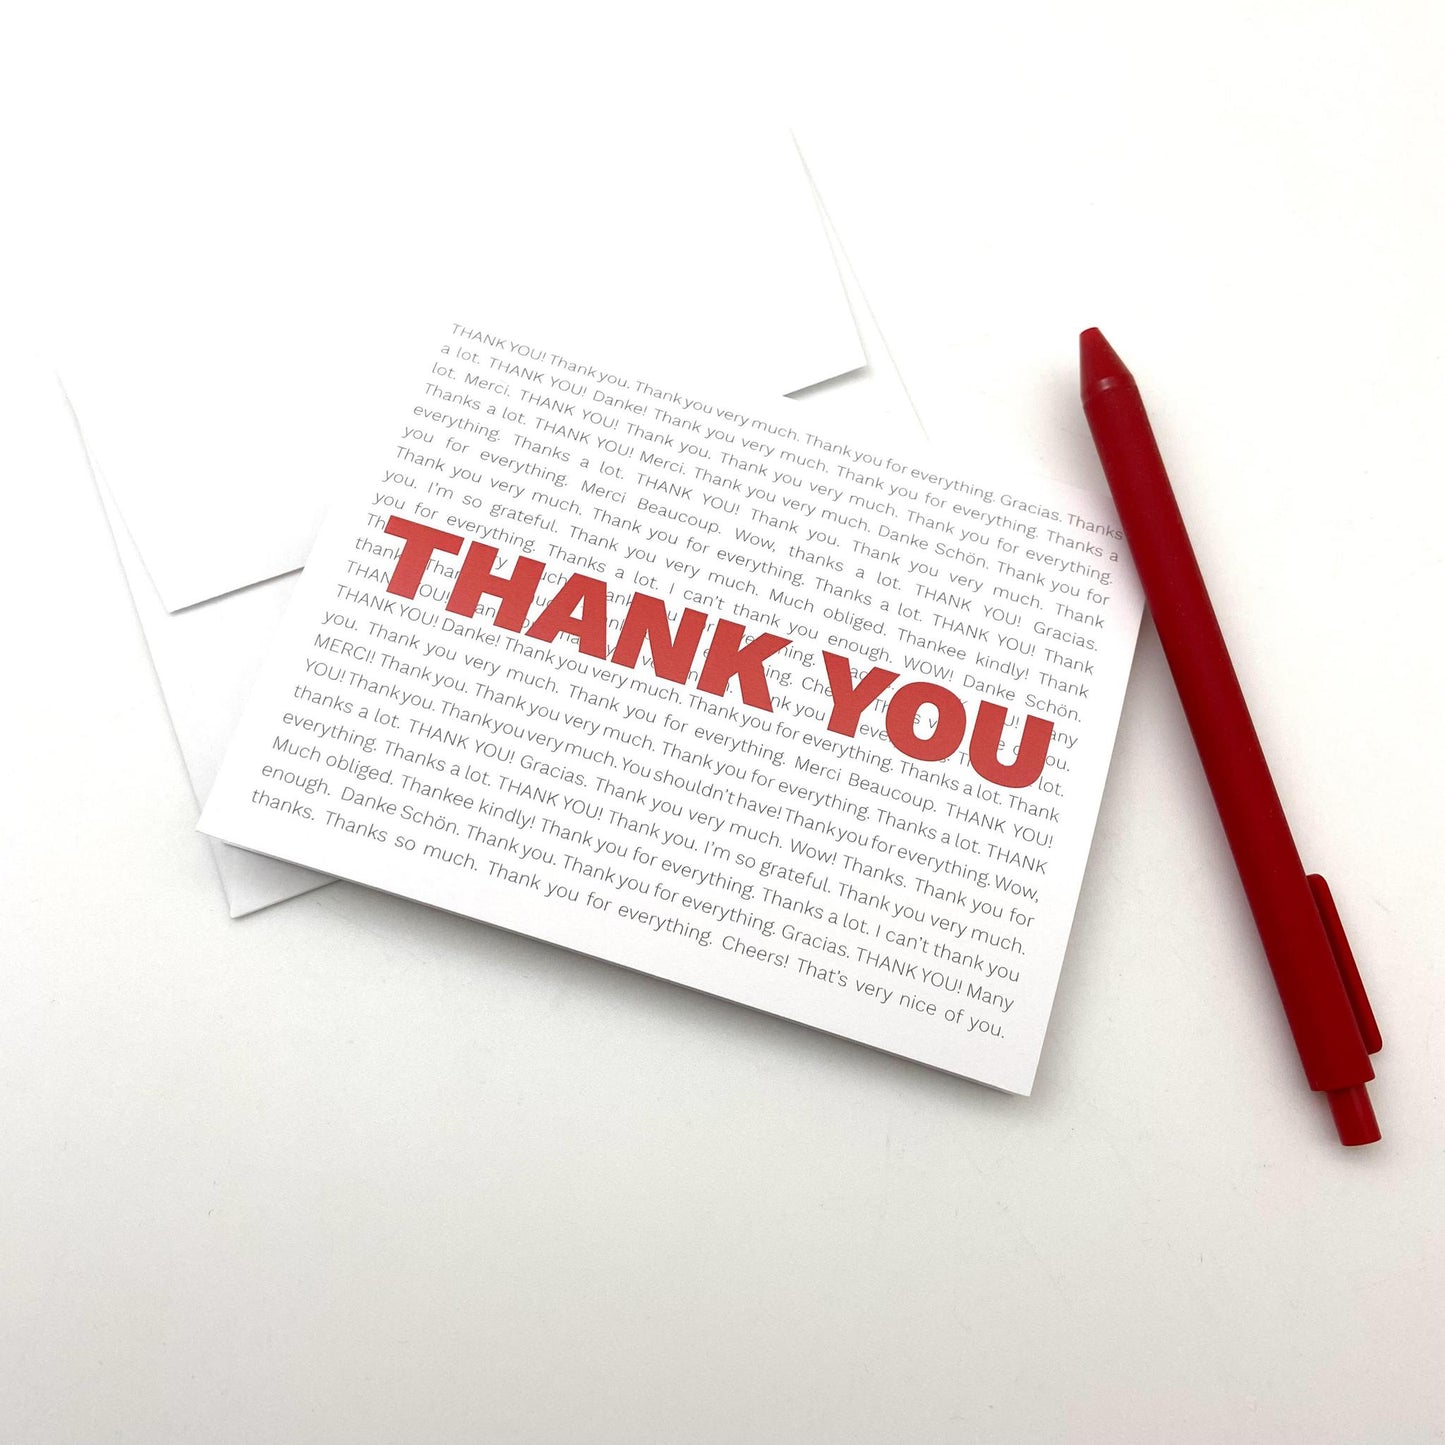 Greeting Card - "Thank You" on Thank Yous